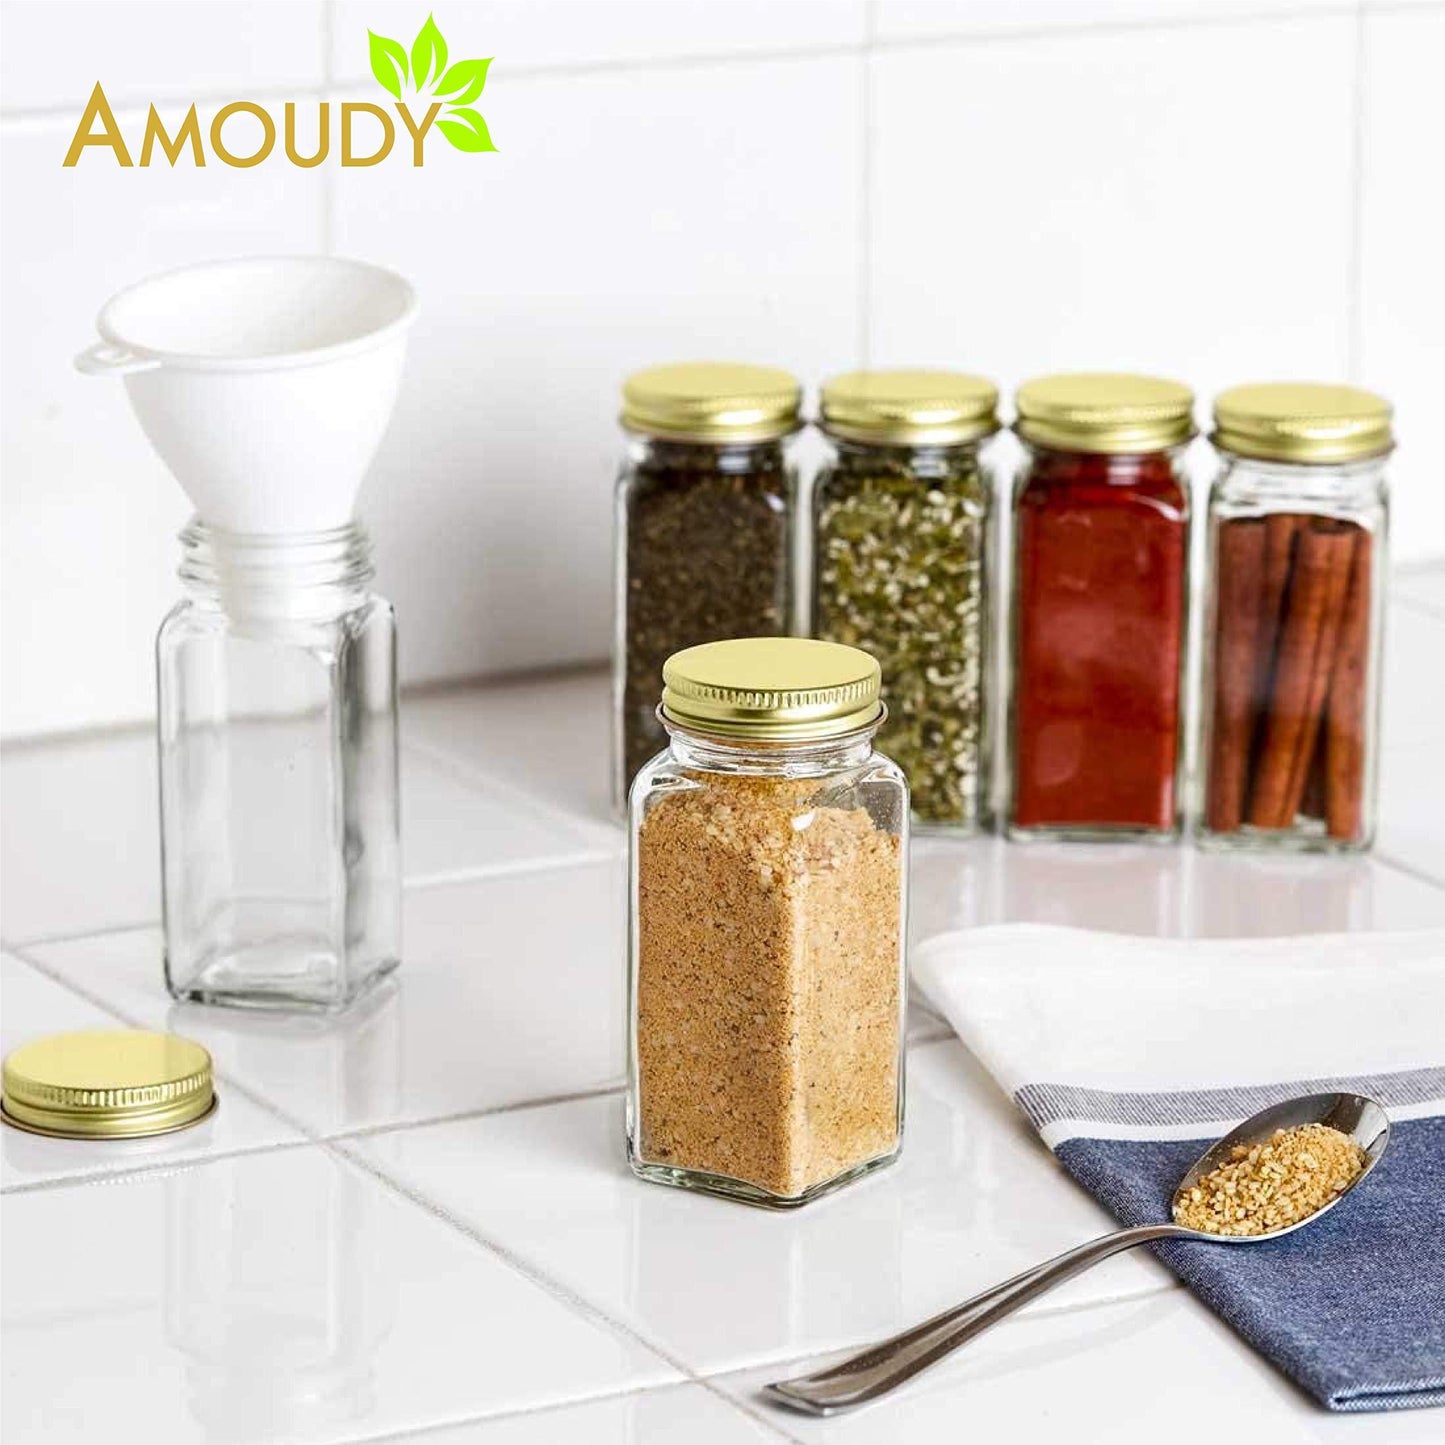 New 12 square clear glass bottles containers jars 4oz with gold metal lids and shaker tops empty organizer set deluxe decorative modern spices seasoning food crafts gifts